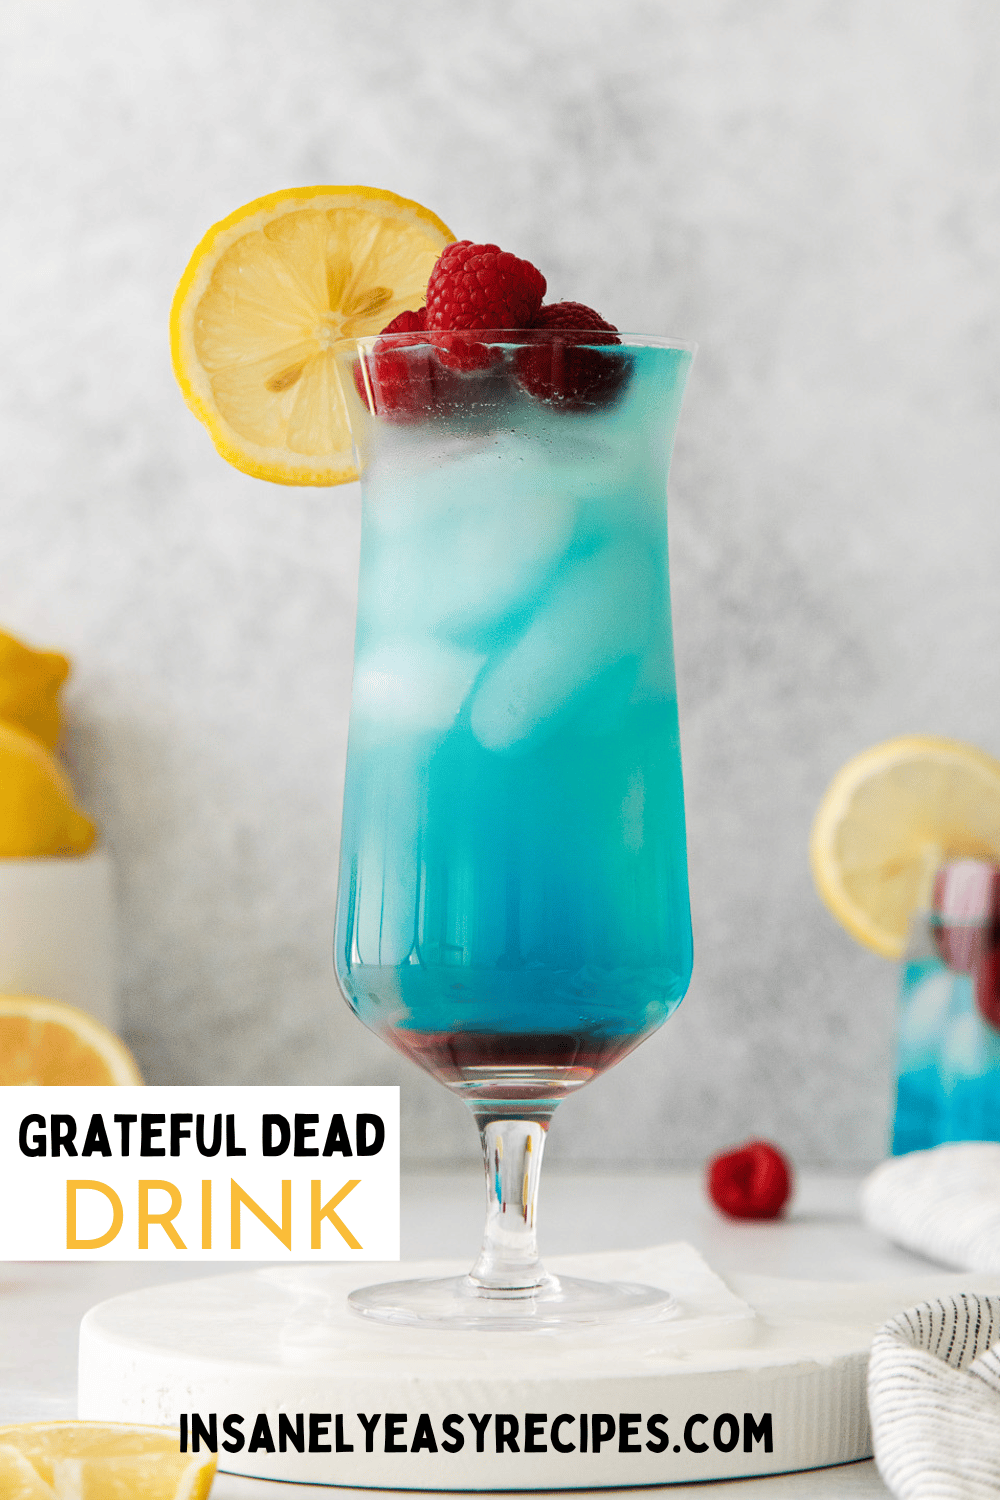 tall clear glass with red liquid at bottom, then blue liquid, with rapsberries and blue umbrella in drink. Surrounded by lemons and raspberries on the table with text overlay: grateful dead drink